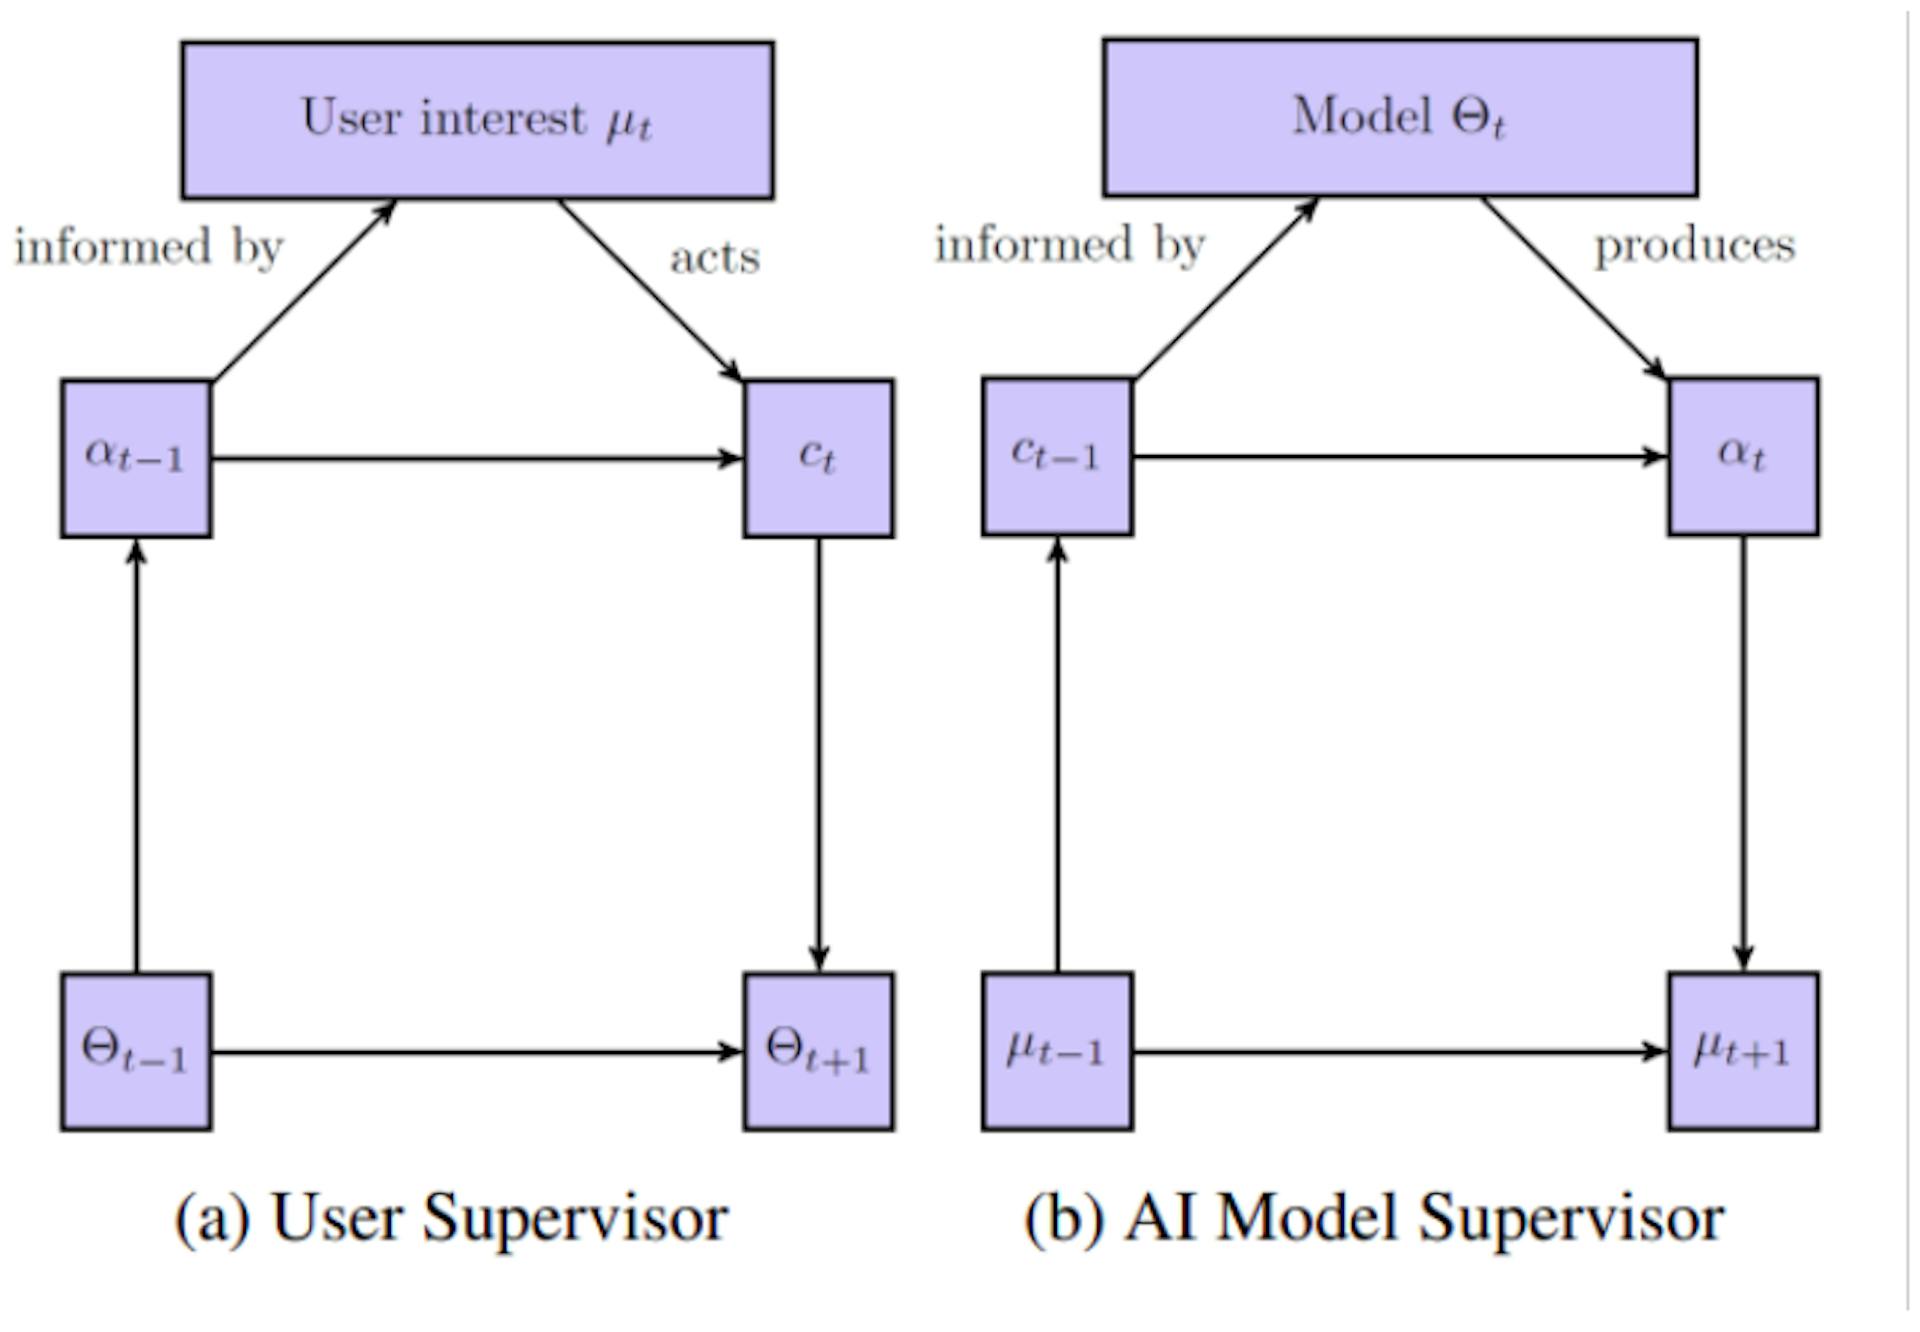 Figure 1: A schematic representation of the control flow in Recommender Systems as seen from the user (a) and AImodel (b) perspective. Adapted from Rakova and Chowdhury (2019).